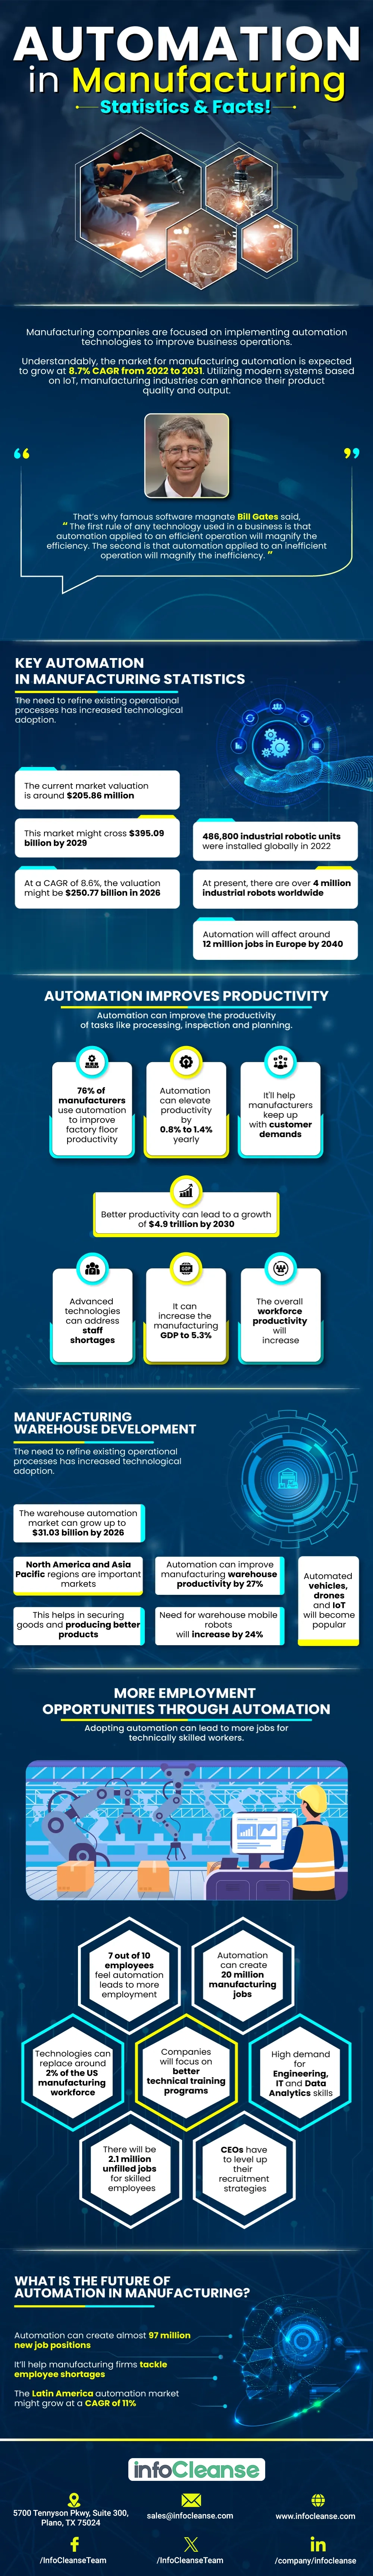 Automation in manufacturing statistics and facts infographic image